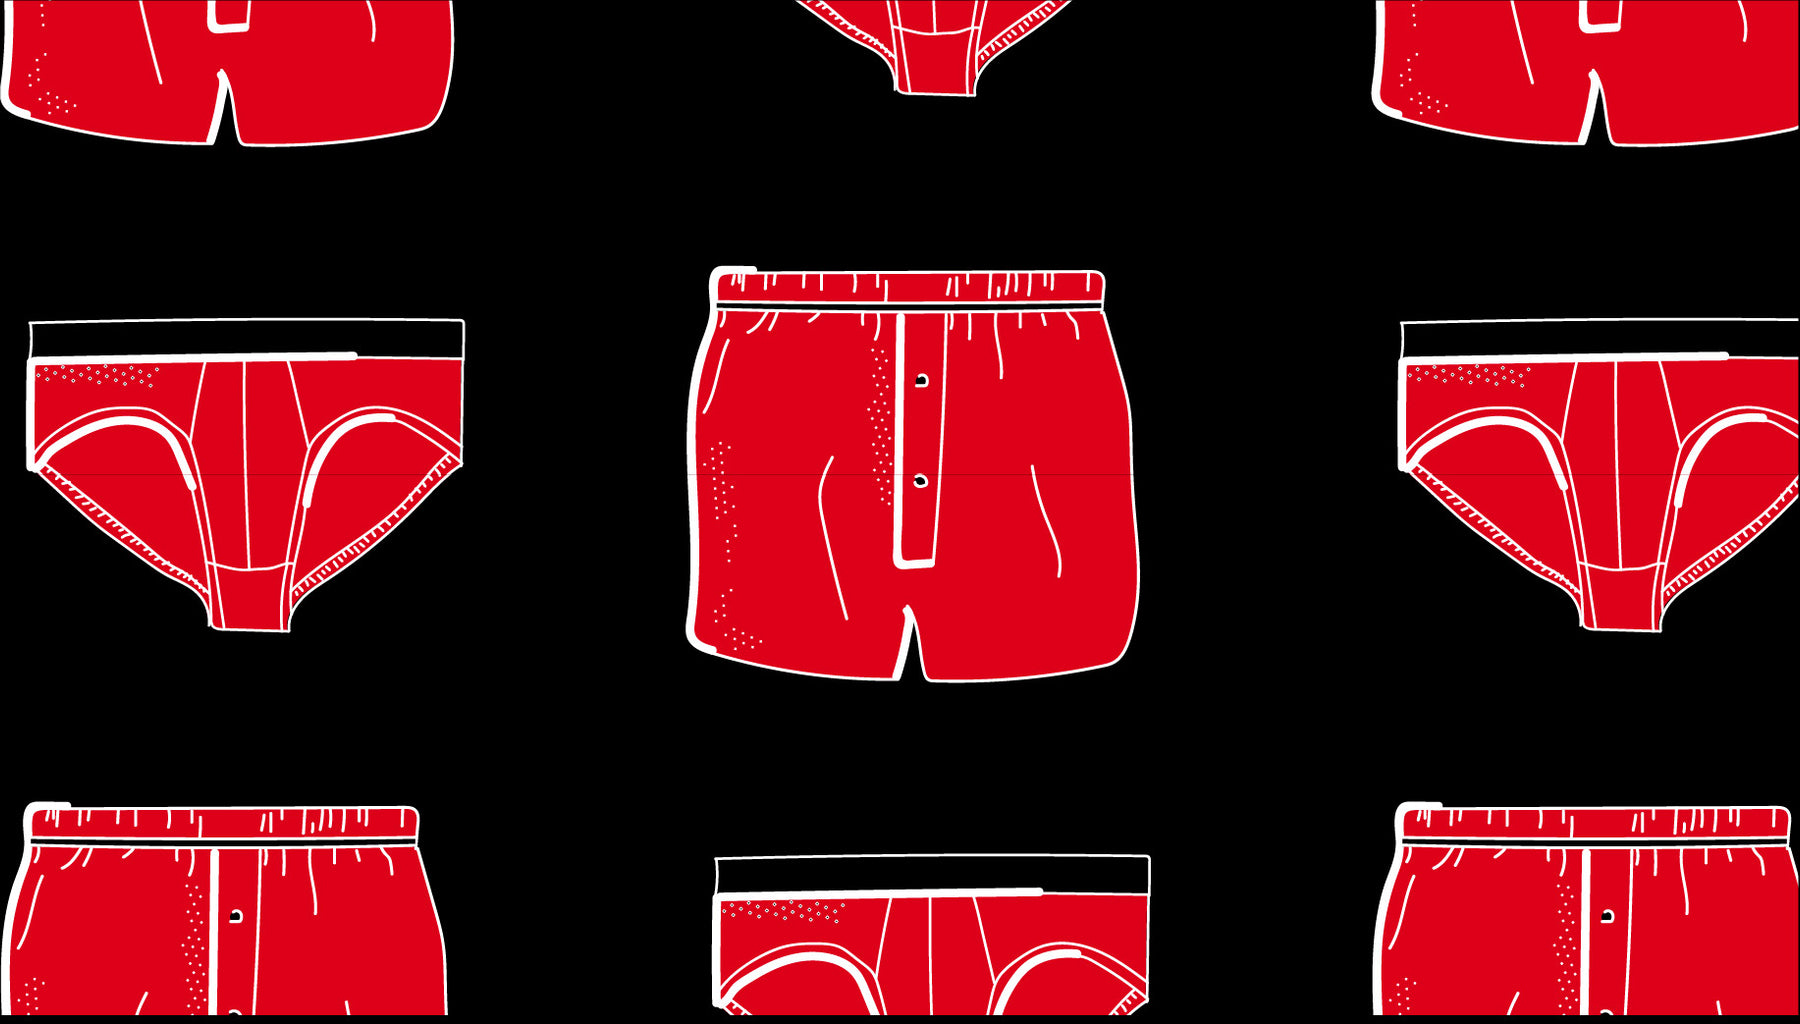 Boxers or Briefs: Which Should You Choose?